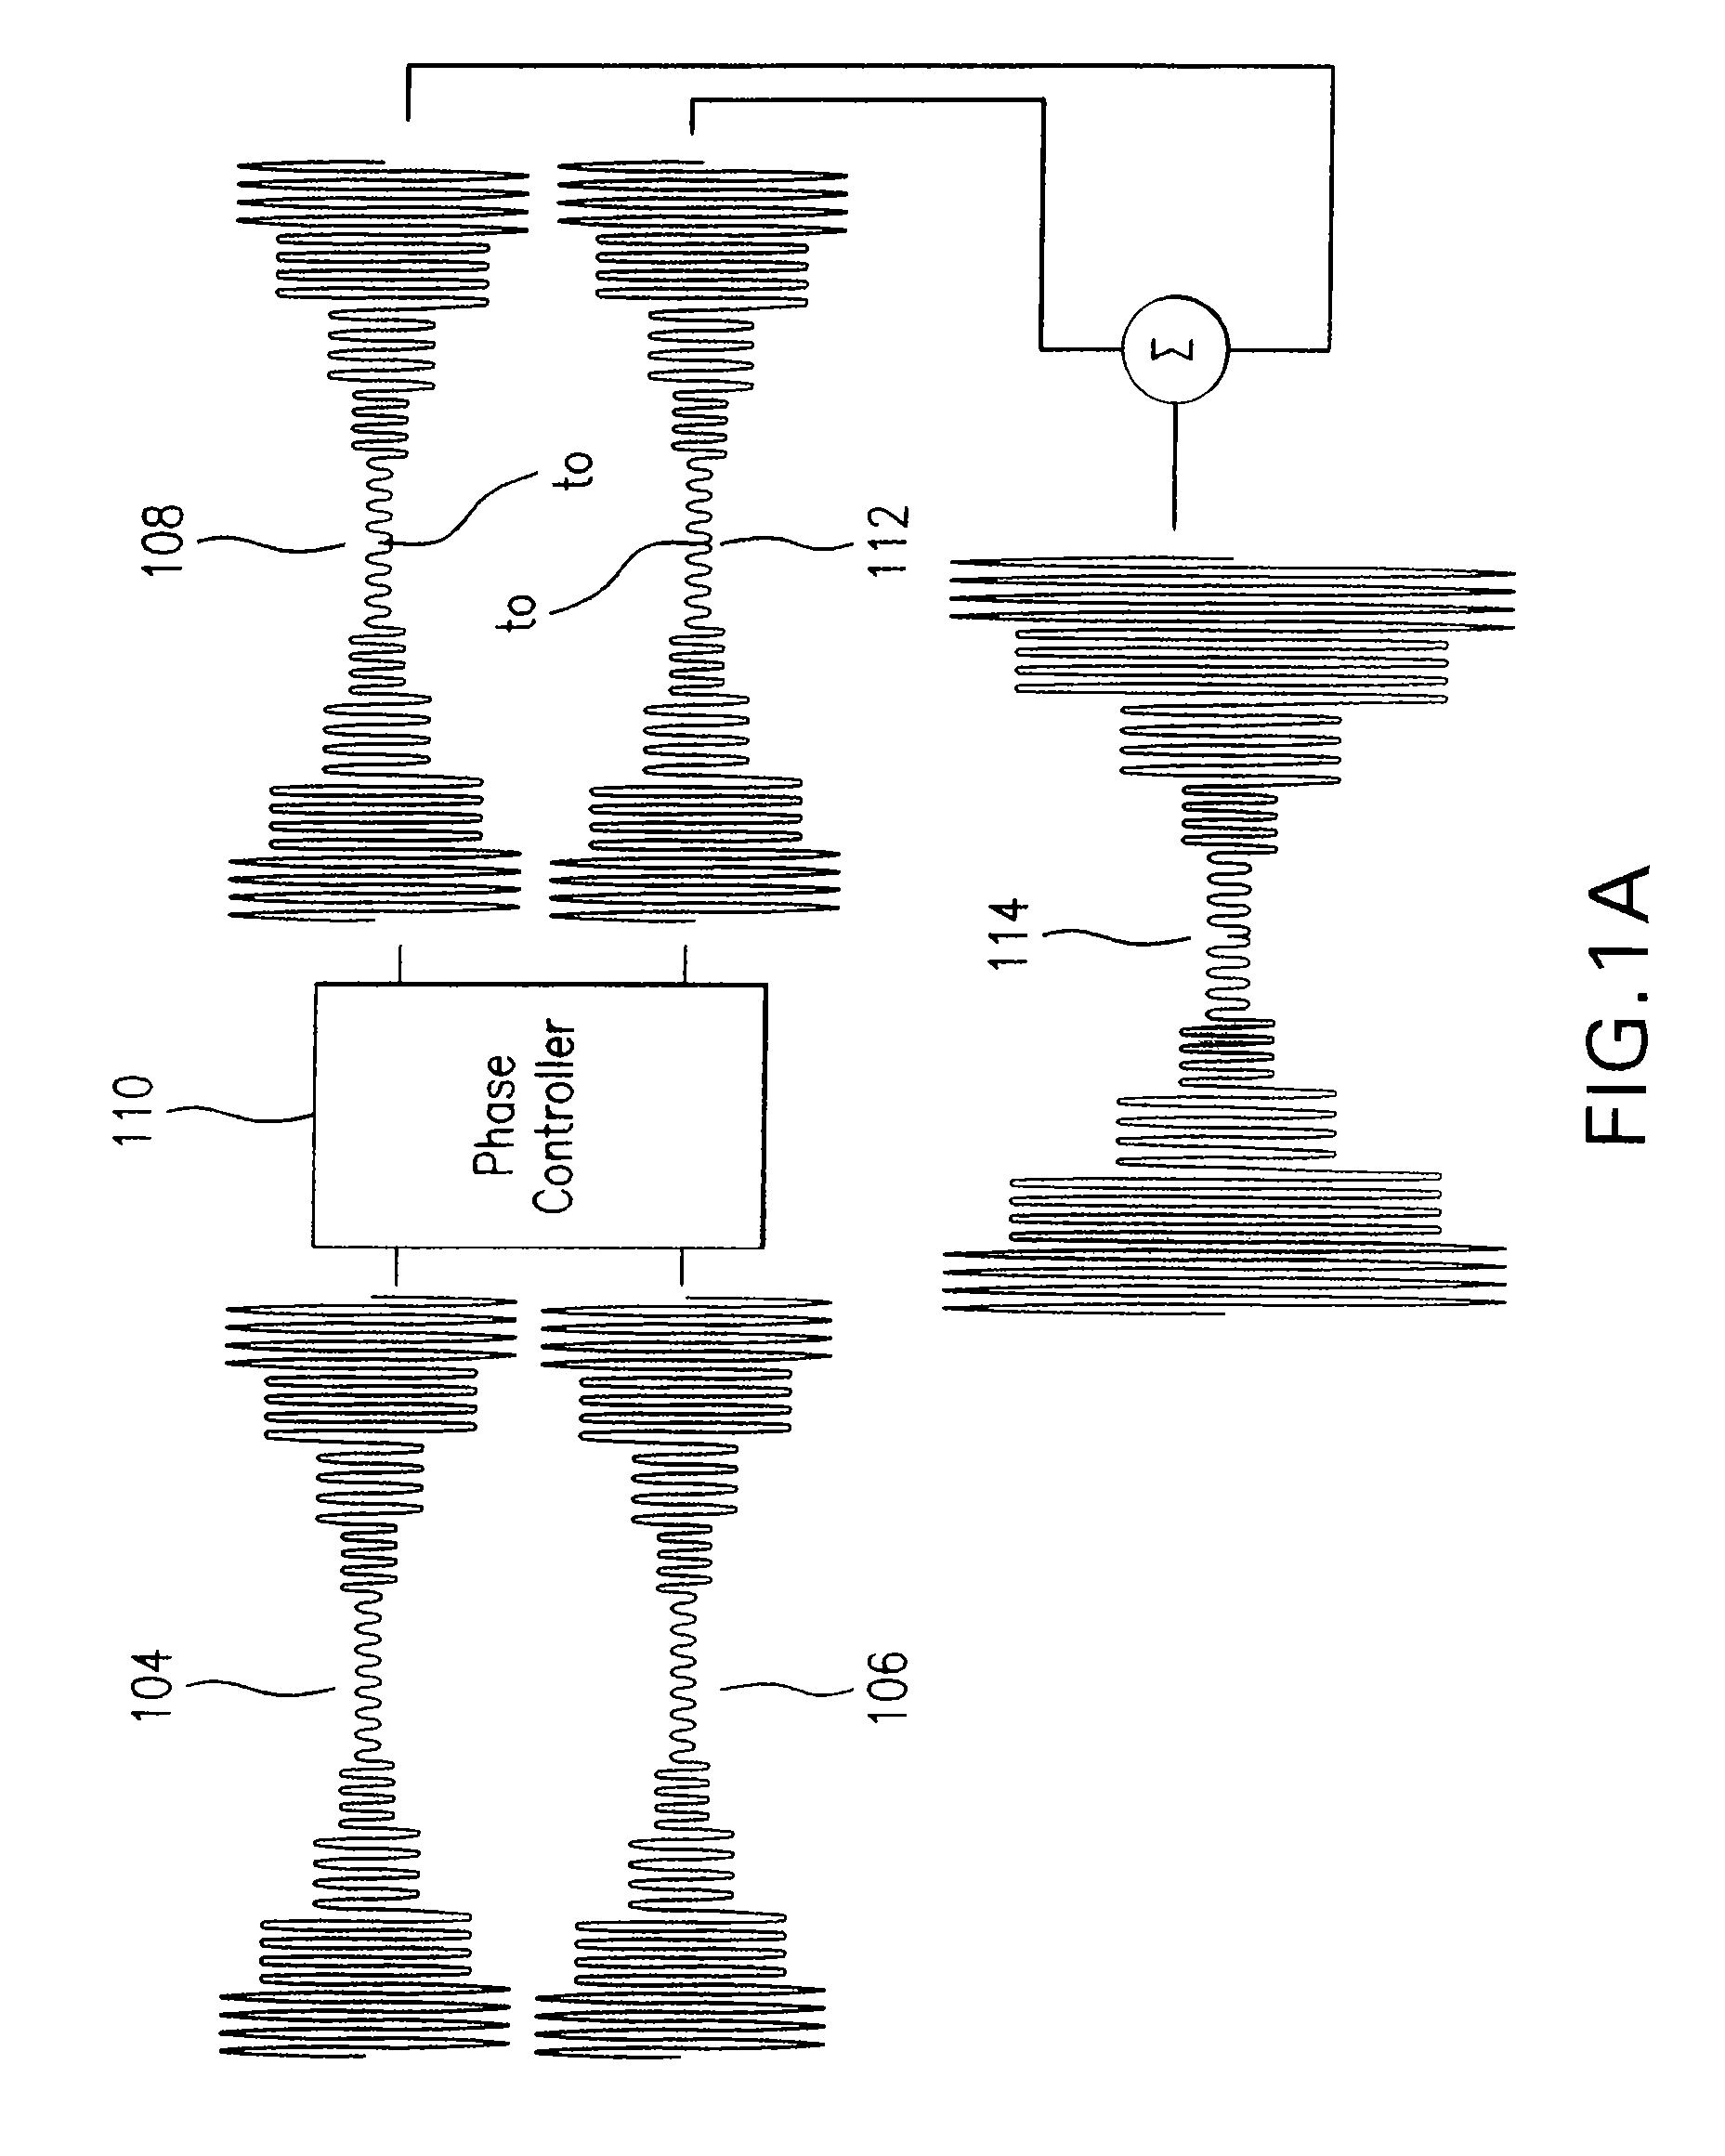 RF power transmission, modulation, and amplification, including embodiments for generating vector modulation control signals